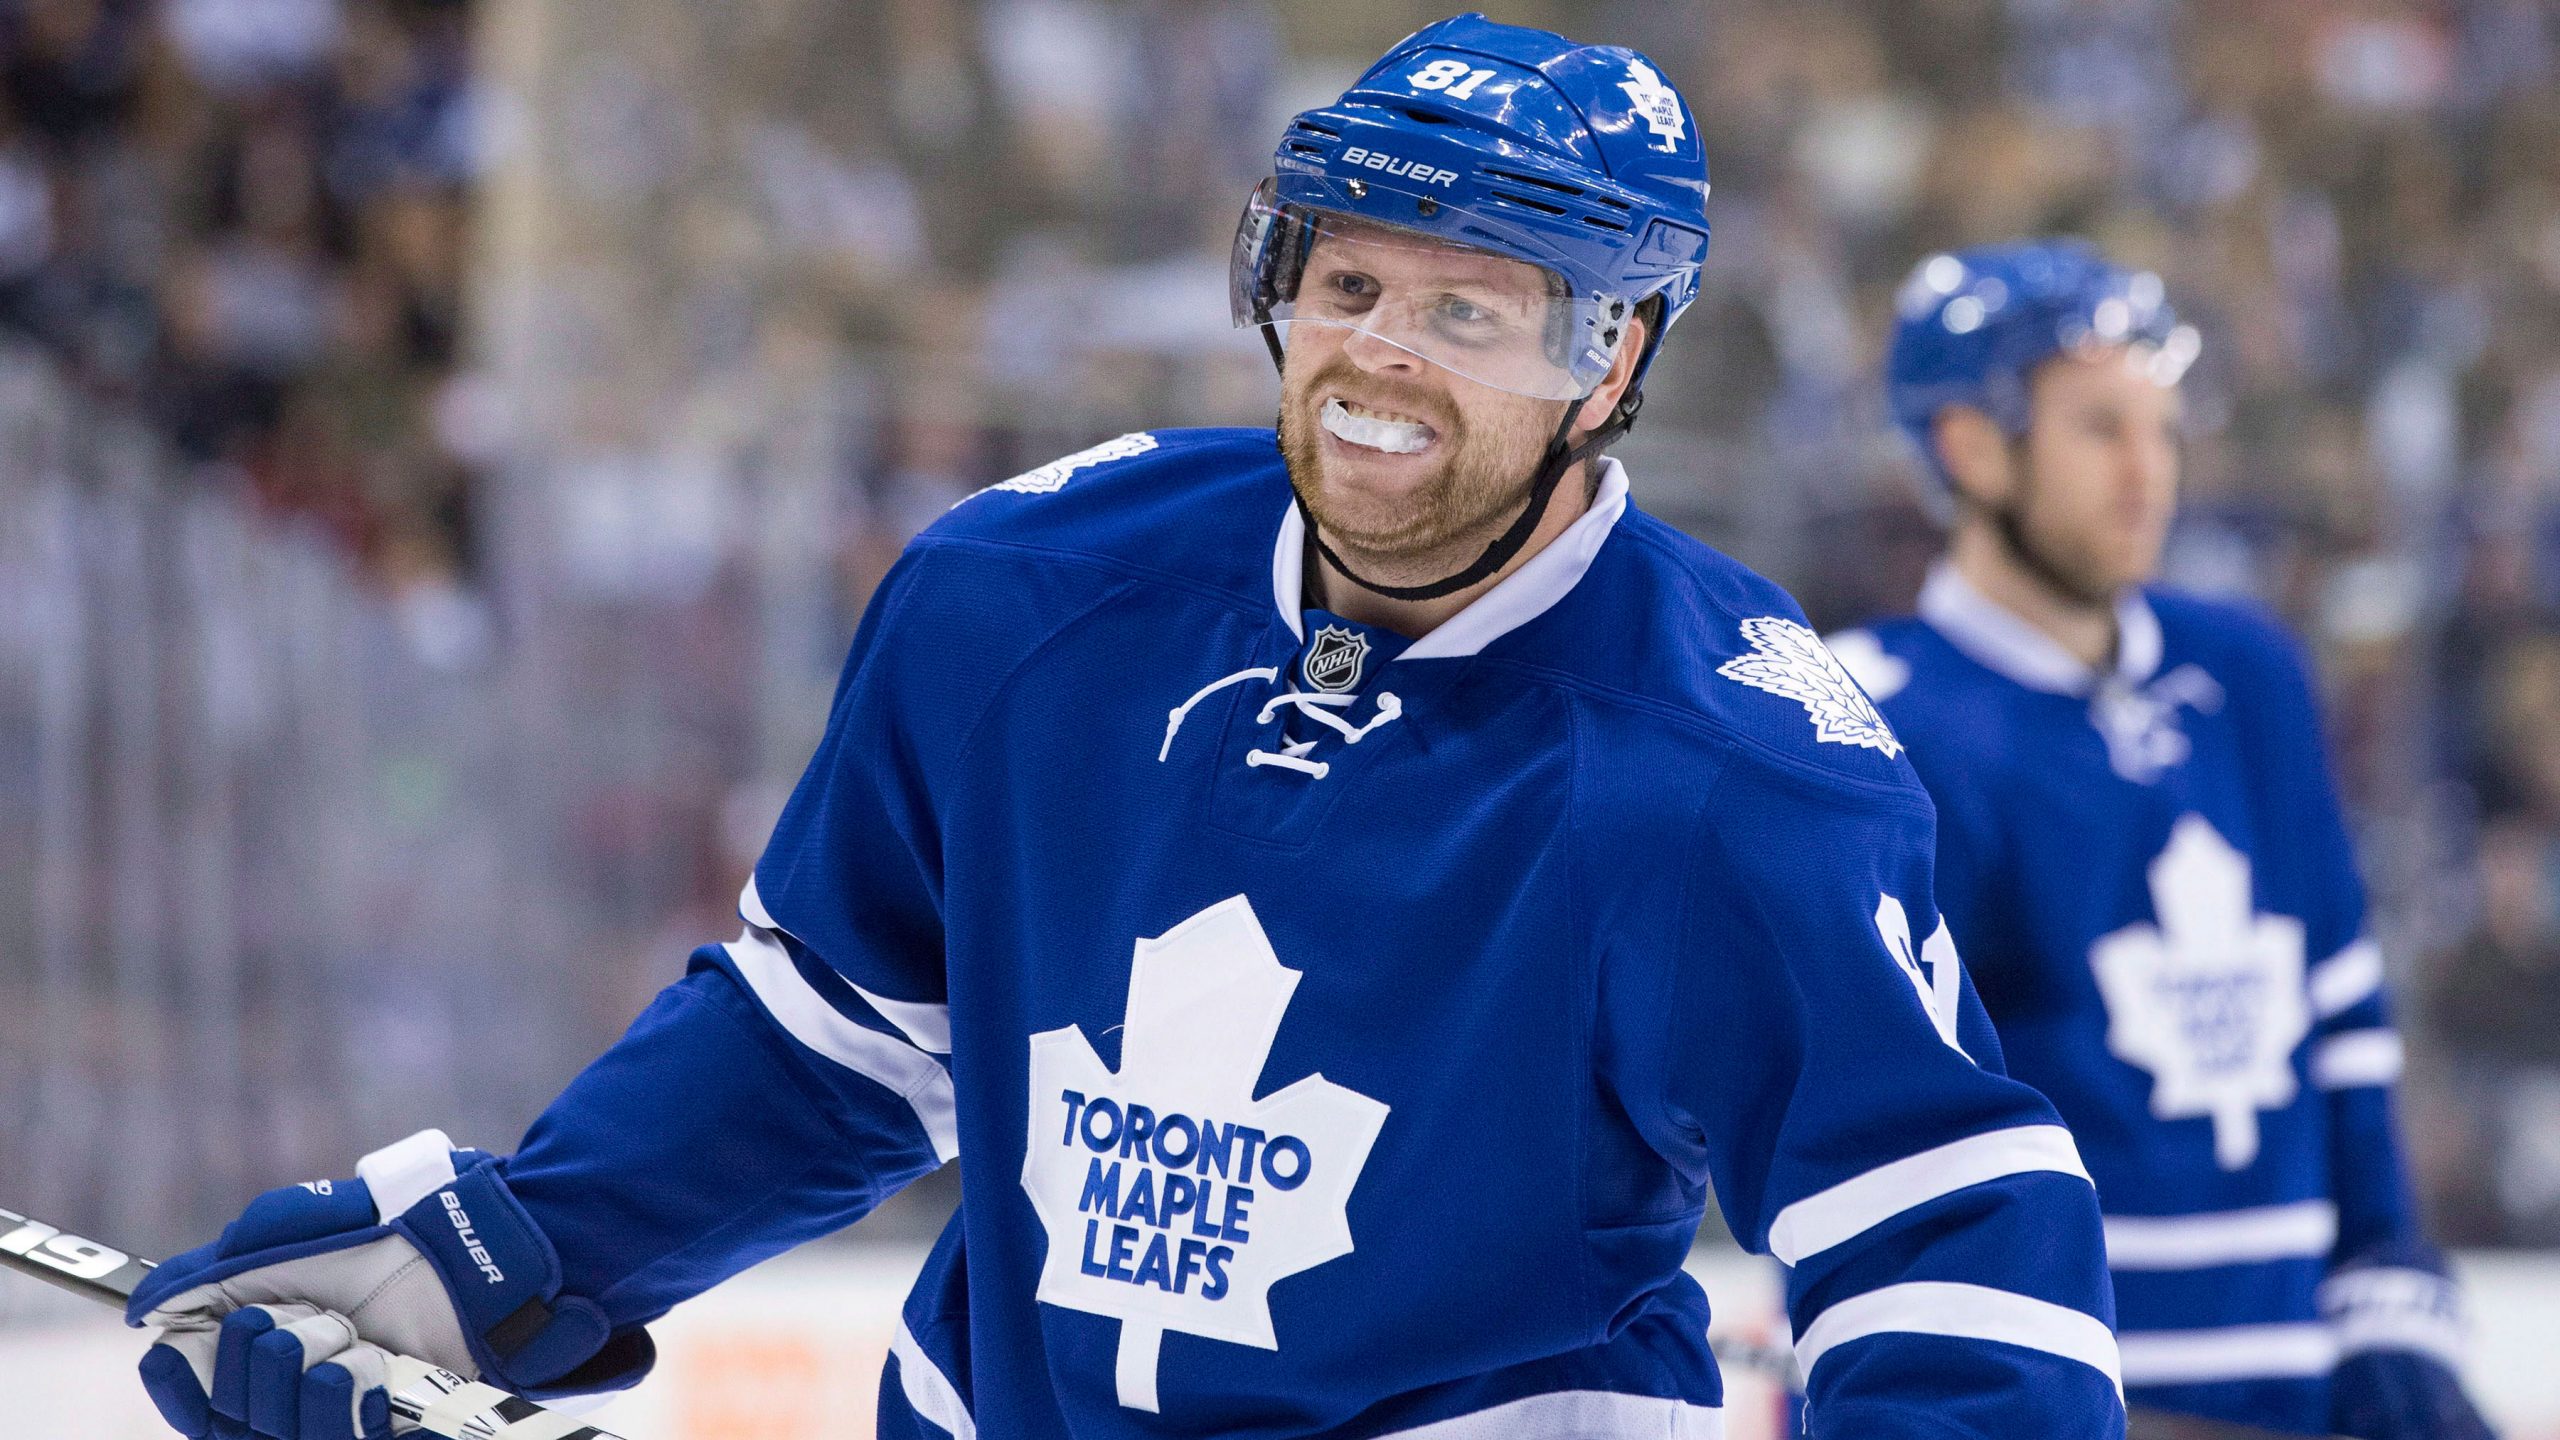 Chronicles of Stanley: Phil Kessel takes Cup to Toronto children's hospital